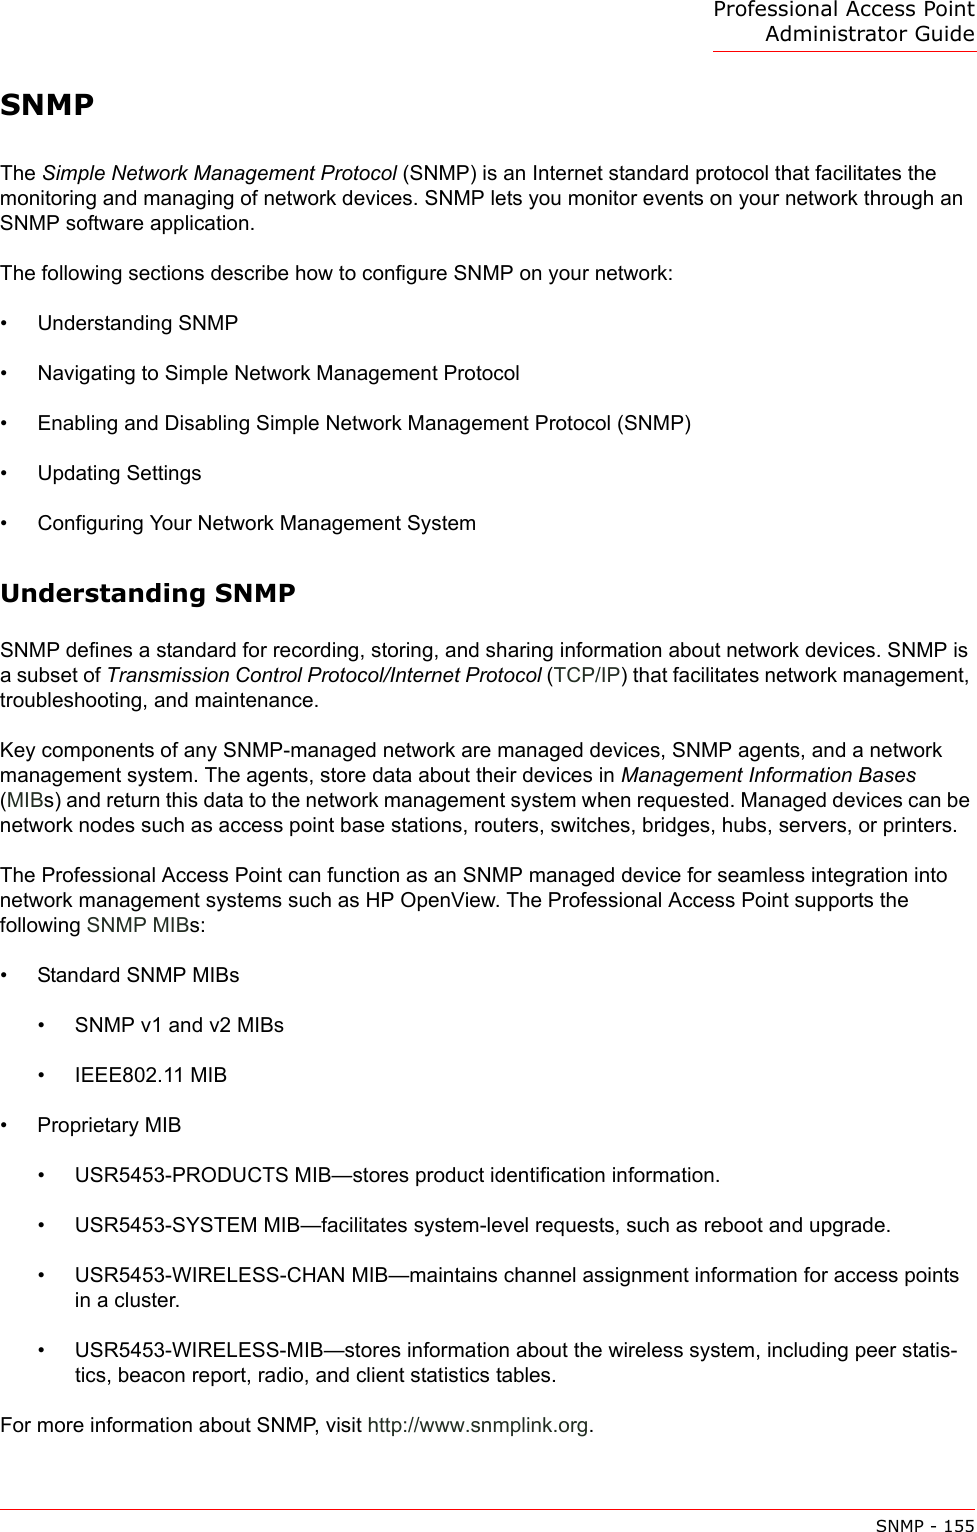 Professional Access Point Administrator GuideSNMP - 155SNMPThe Simple Network Management Protocol (SNMP) is an Internet standard protocol that facilitates the monitoring and managing of network devices. SNMP lets you monitor events on your network through an SNMP software application.The following sections describe how to configure SNMP on your network:•Understanding SNMP•Navigating to Simple Network Management Protocol•Enabling and Disabling Simple Network Management Protocol (SNMP)•Updating Settings•Configuring Your Network Management SystemUnderstanding SNMPSNMP defines a standard for recording, storing, and sharing information about network devices. SNMP is a subset of Transmission Control Protocol/Internet Protocol (TCP/IP) that facilitates network management, troubleshooting, and maintenance.Key components of any SNMP-managed network are managed devices, SNMP agents, and a network management system. The agents, store data about their devices in Management Information Bases (MIBs) and return this data to the network management system when requested. Managed devices can be network nodes such as access point base stations, routers, switches, bridges, hubs, servers, or printers.The Professional Access Point can function as an SNMP managed device for seamless integration into network management systems such as HP OpenView. The Professional Access Point supports the following SNMP MIBs:• Standard SNMP MIBs• SNMP v1 and v2 MIBs• IEEE802.11 MIB• Proprietary MIB • USR5453-PRODUCTS MIB—stores product identification information.• USR5453-SYSTEM MIB—facilitates system-level requests, such as reboot and upgrade.• USR5453-WIRELESS-CHAN MIB—maintains channel assignment information for access points in a cluster.• USR5453-WIRELESS-MIB—stores information about the wireless system, including peer statis-tics, beacon report, radio, and client statistics tables.For more information about SNMP, visit http://www.snmplink.org.